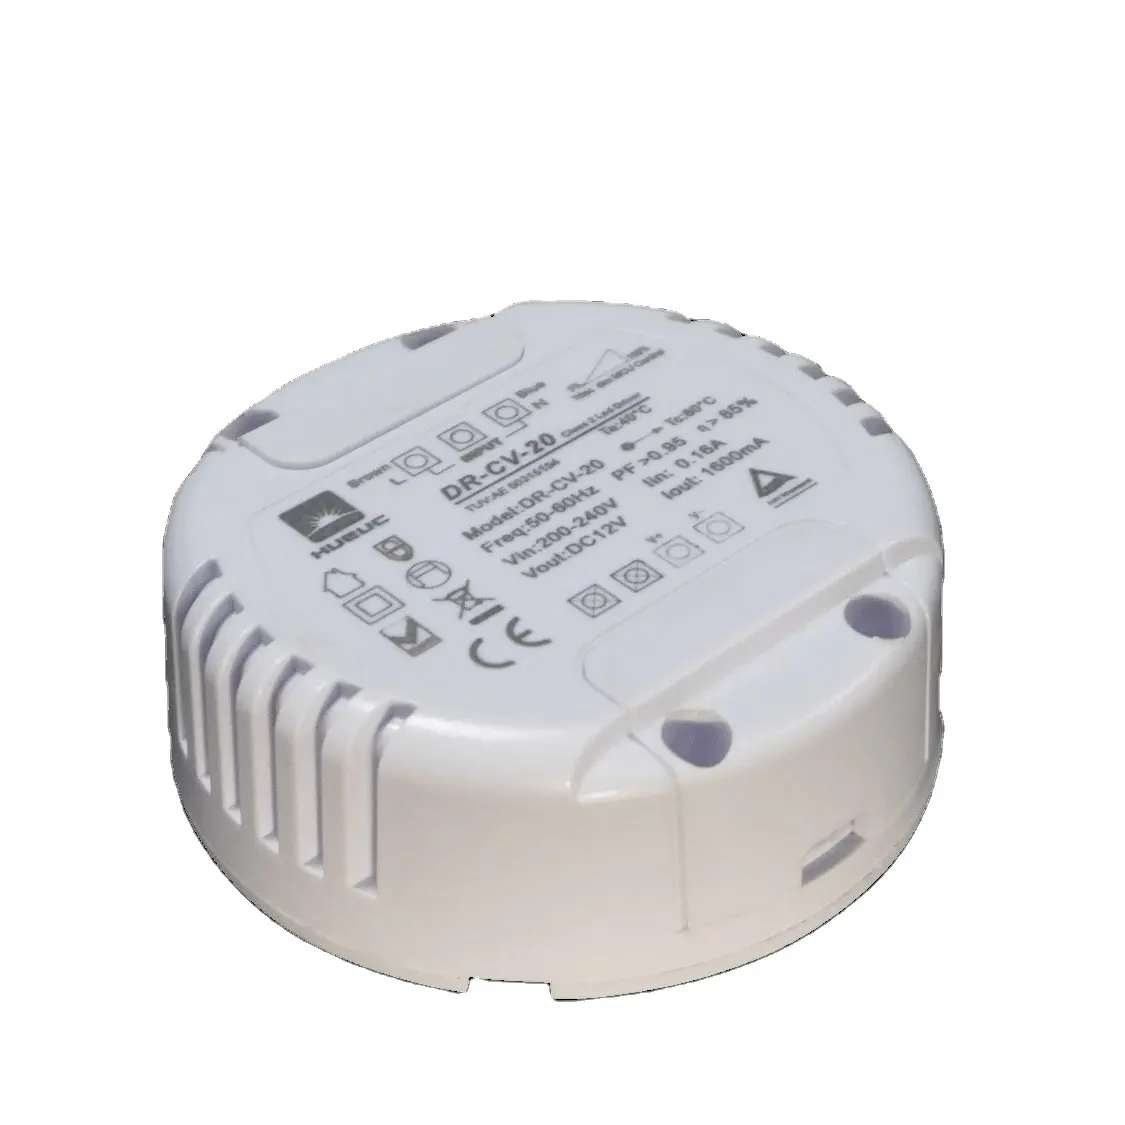 12W 20W 30W 40W 60w round led driver constant current 12VDC 24VDC led power supply